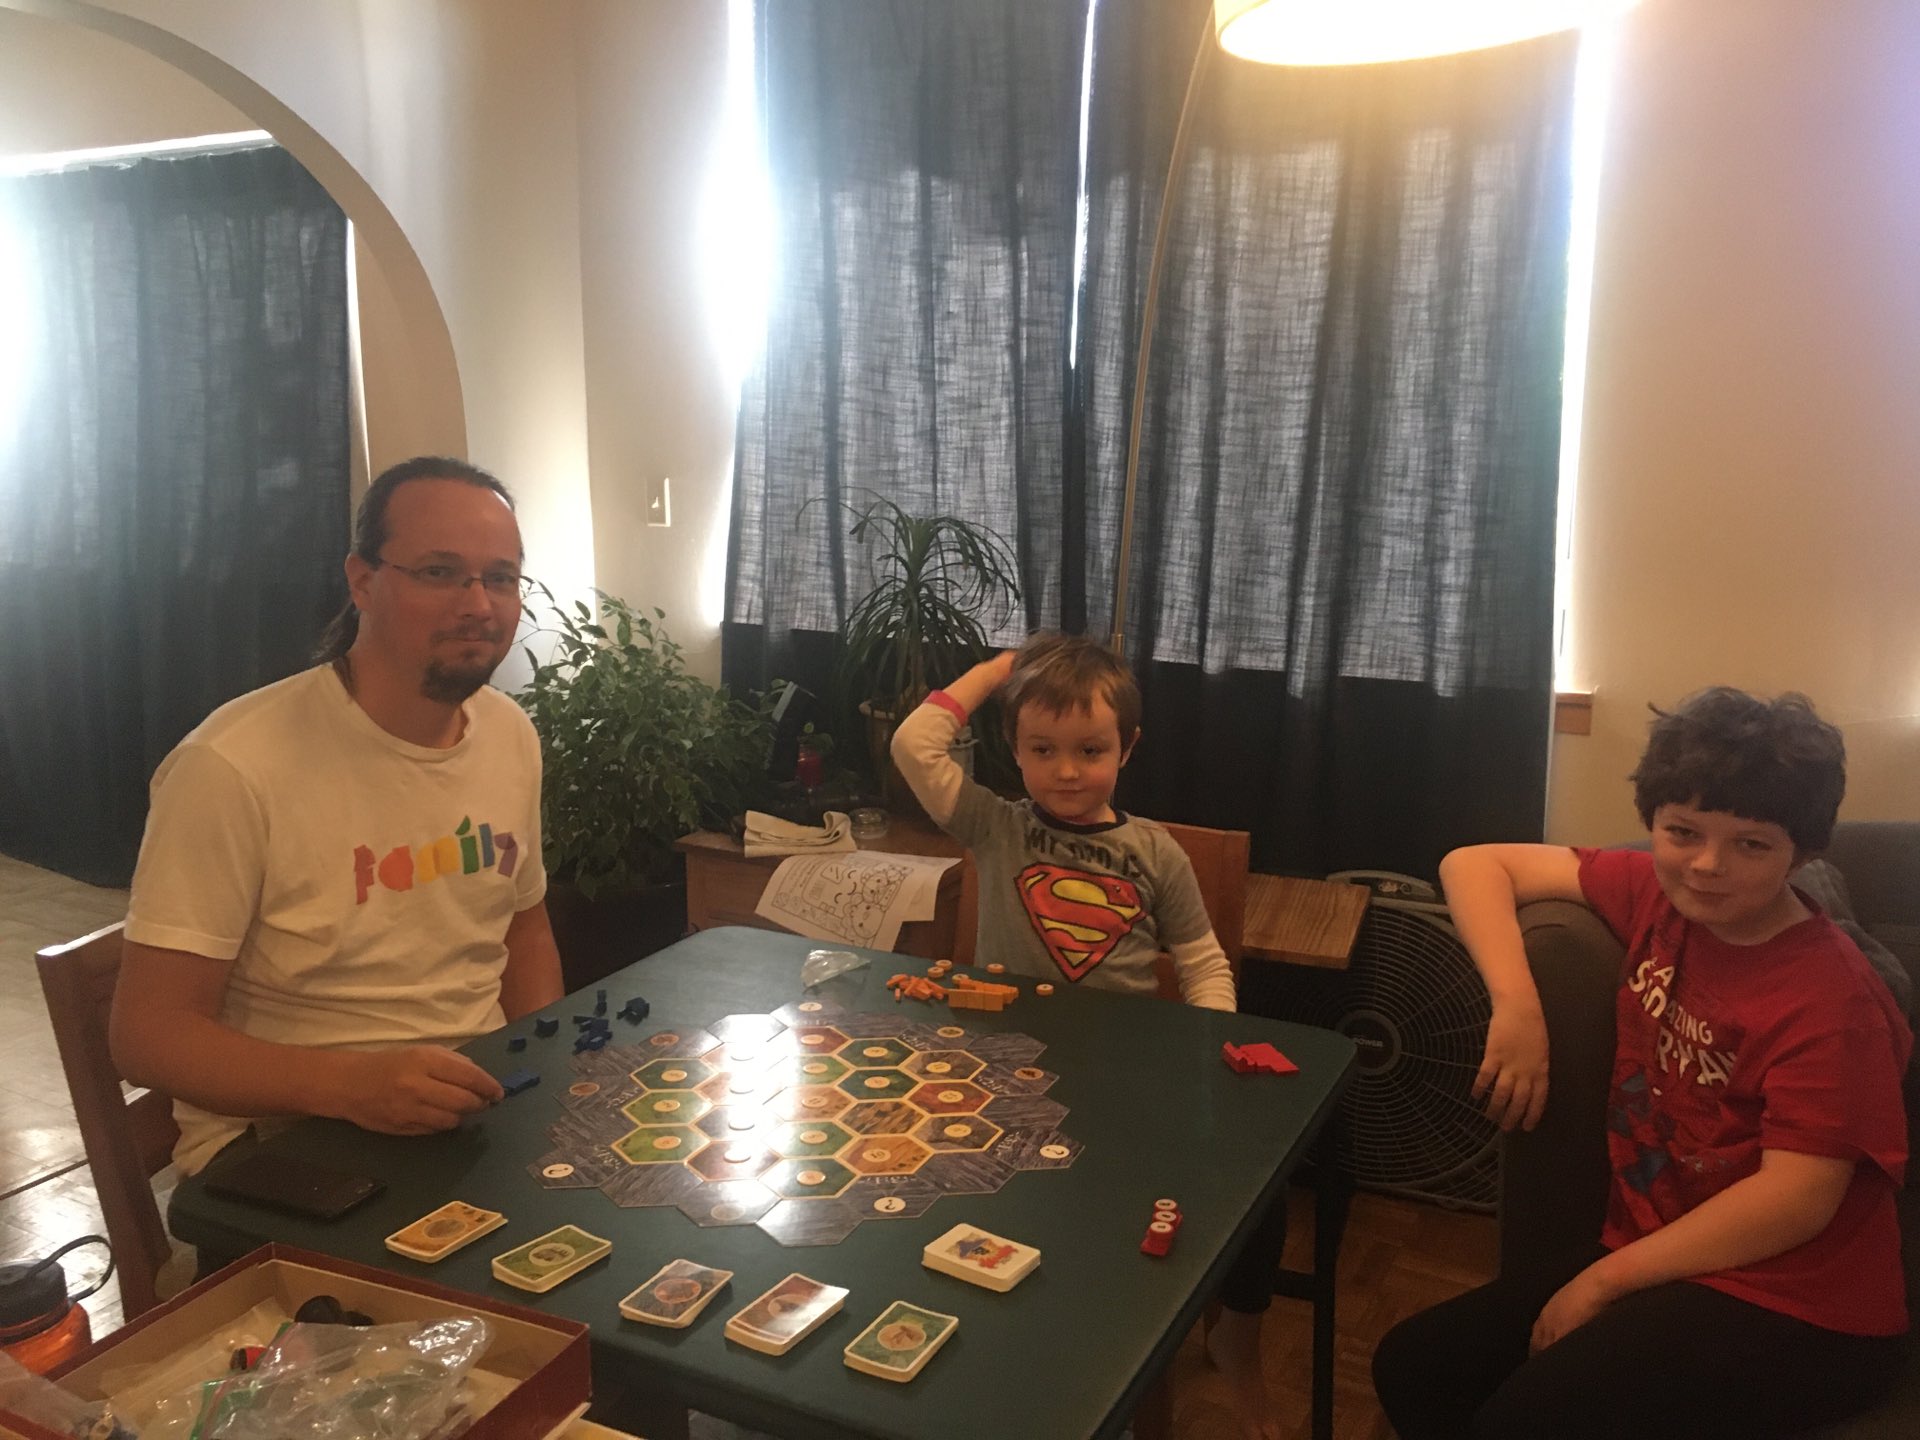 Ted and Julian around a green card table with the hexagonal Catan tiles lade out. Calvin's arm is visible but the rest of him is off screen.